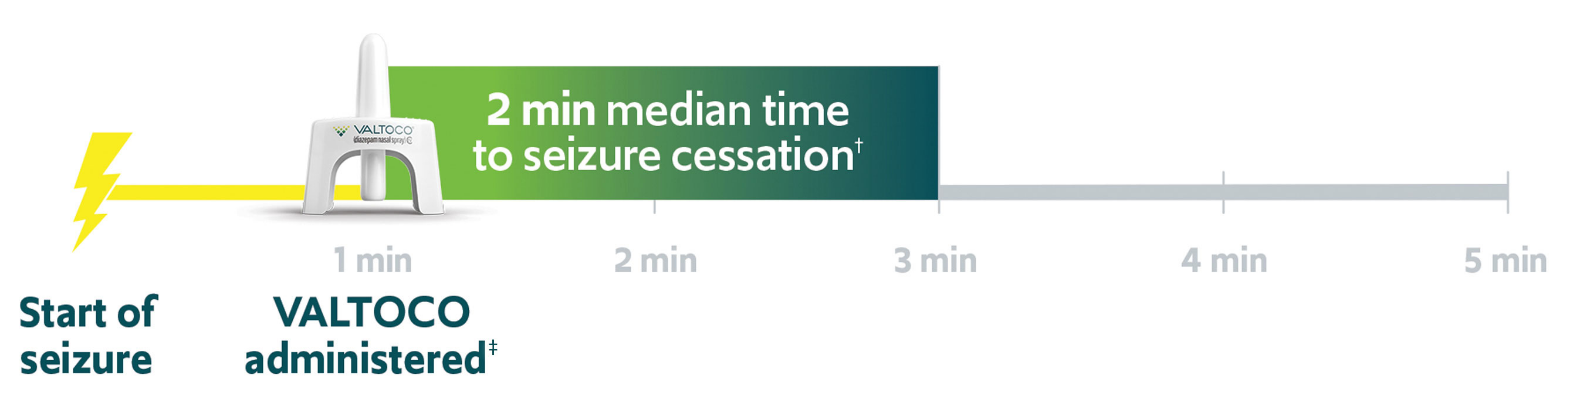 2-minute median time to seizure cessation graphic